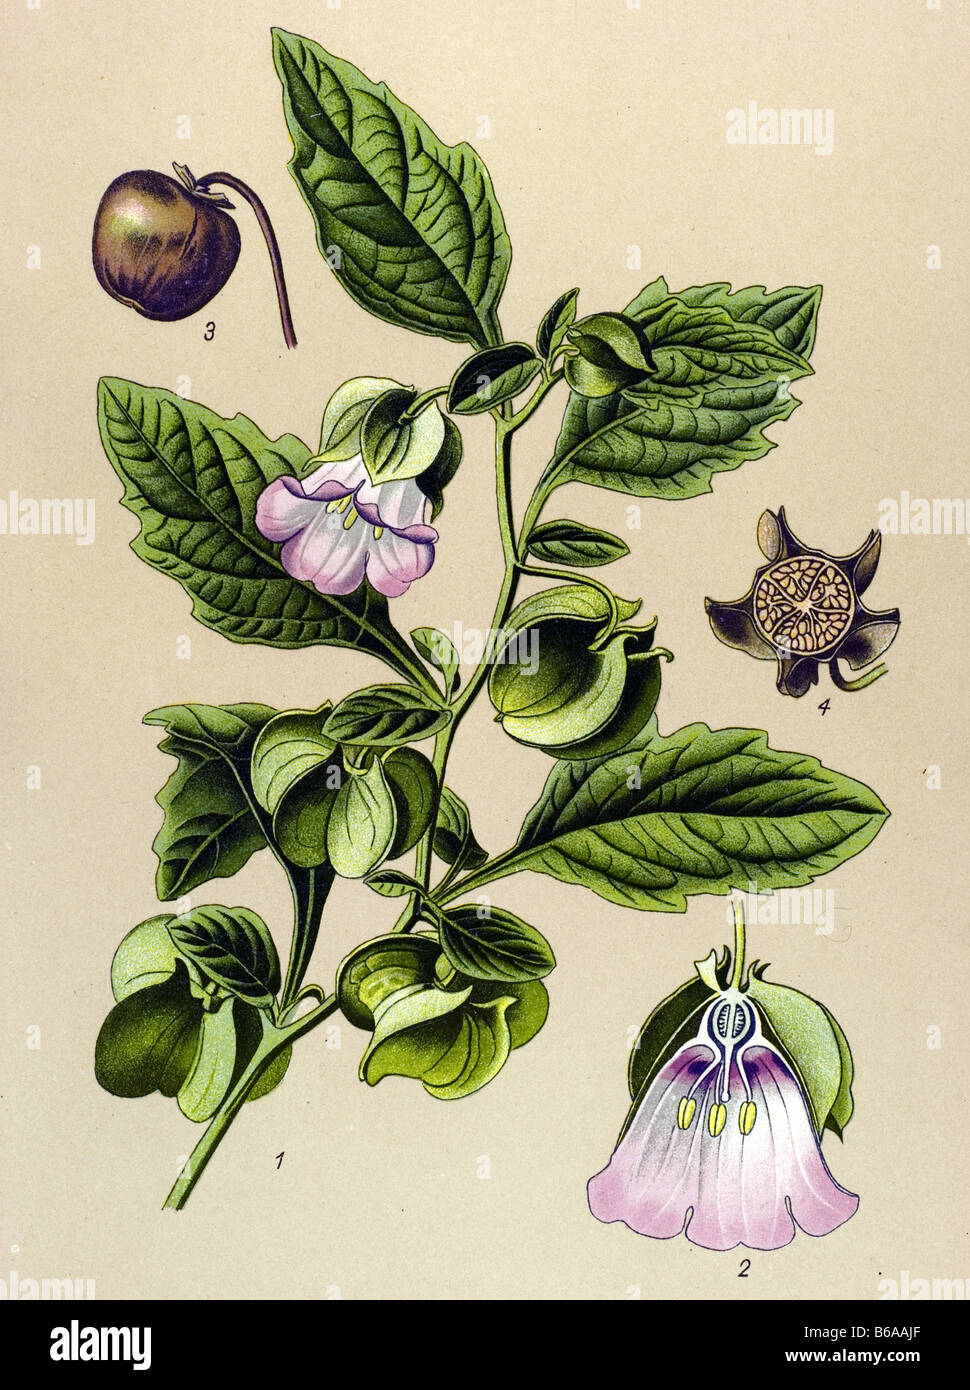 Apple of Peru, Nicandra physaloides poisonous plants illustrations Stock Photo